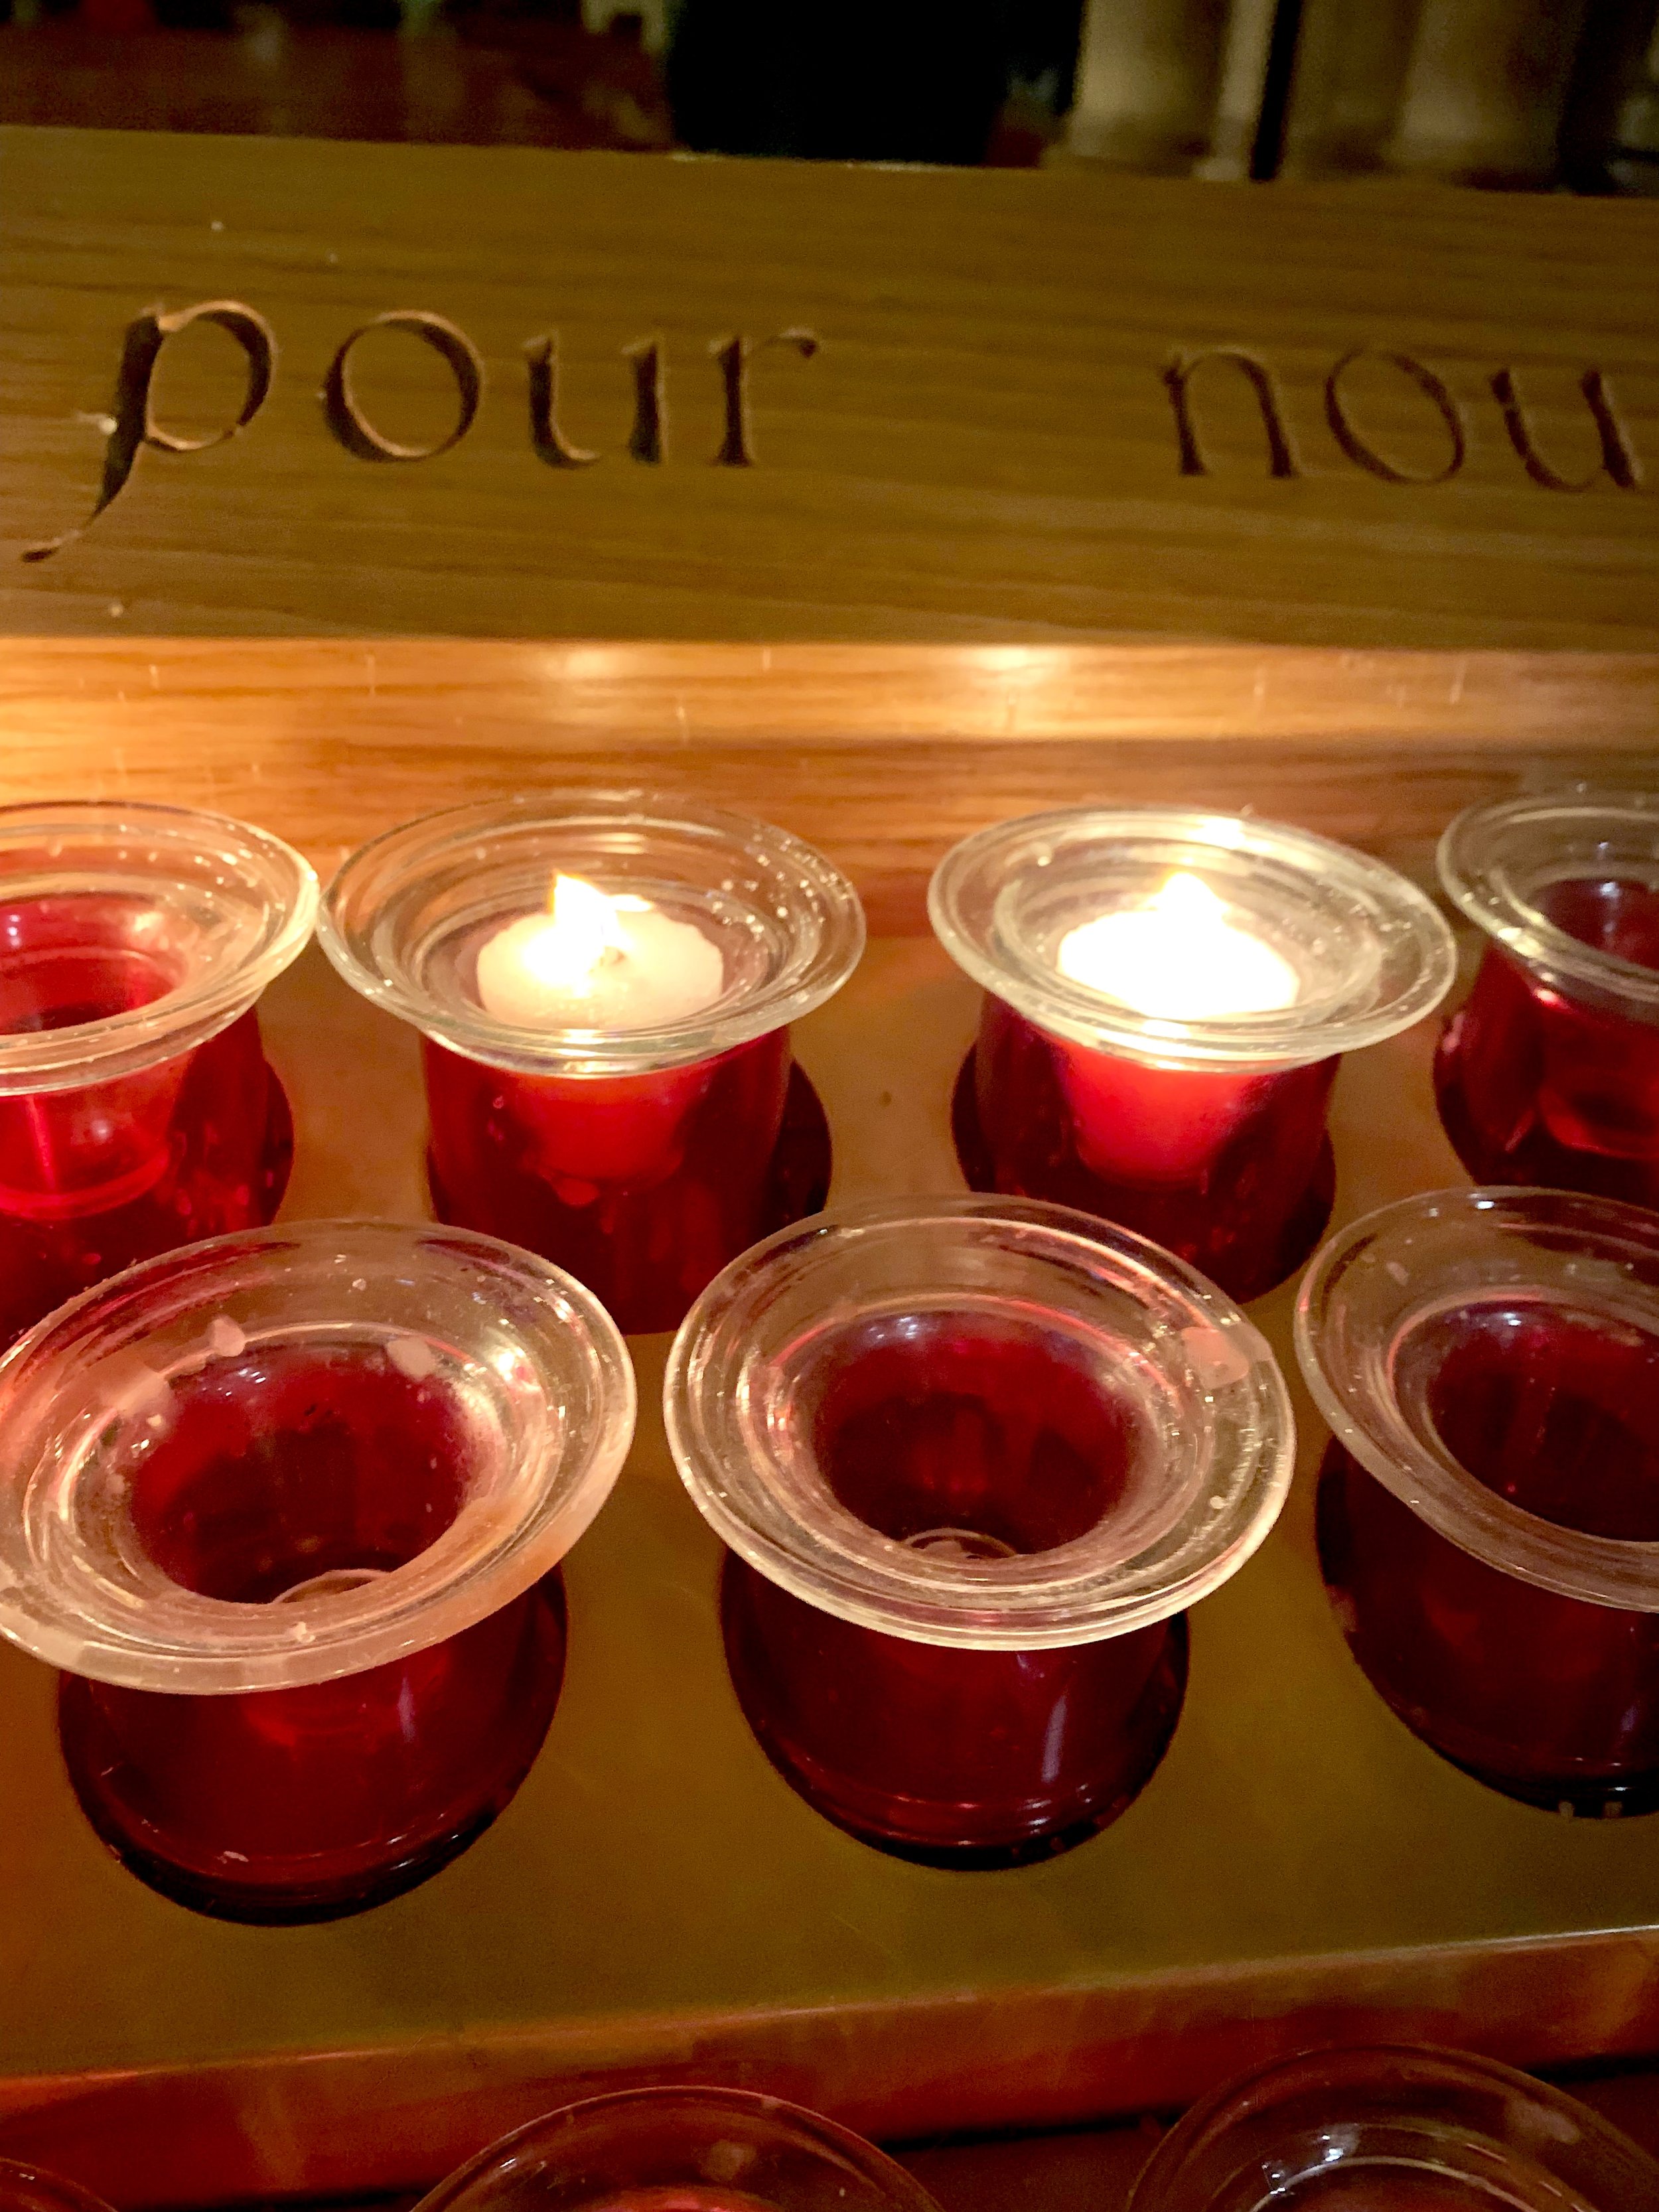 Devi Ohira Paris Notre Dame New Years Day free entry candle tour sights.JPG